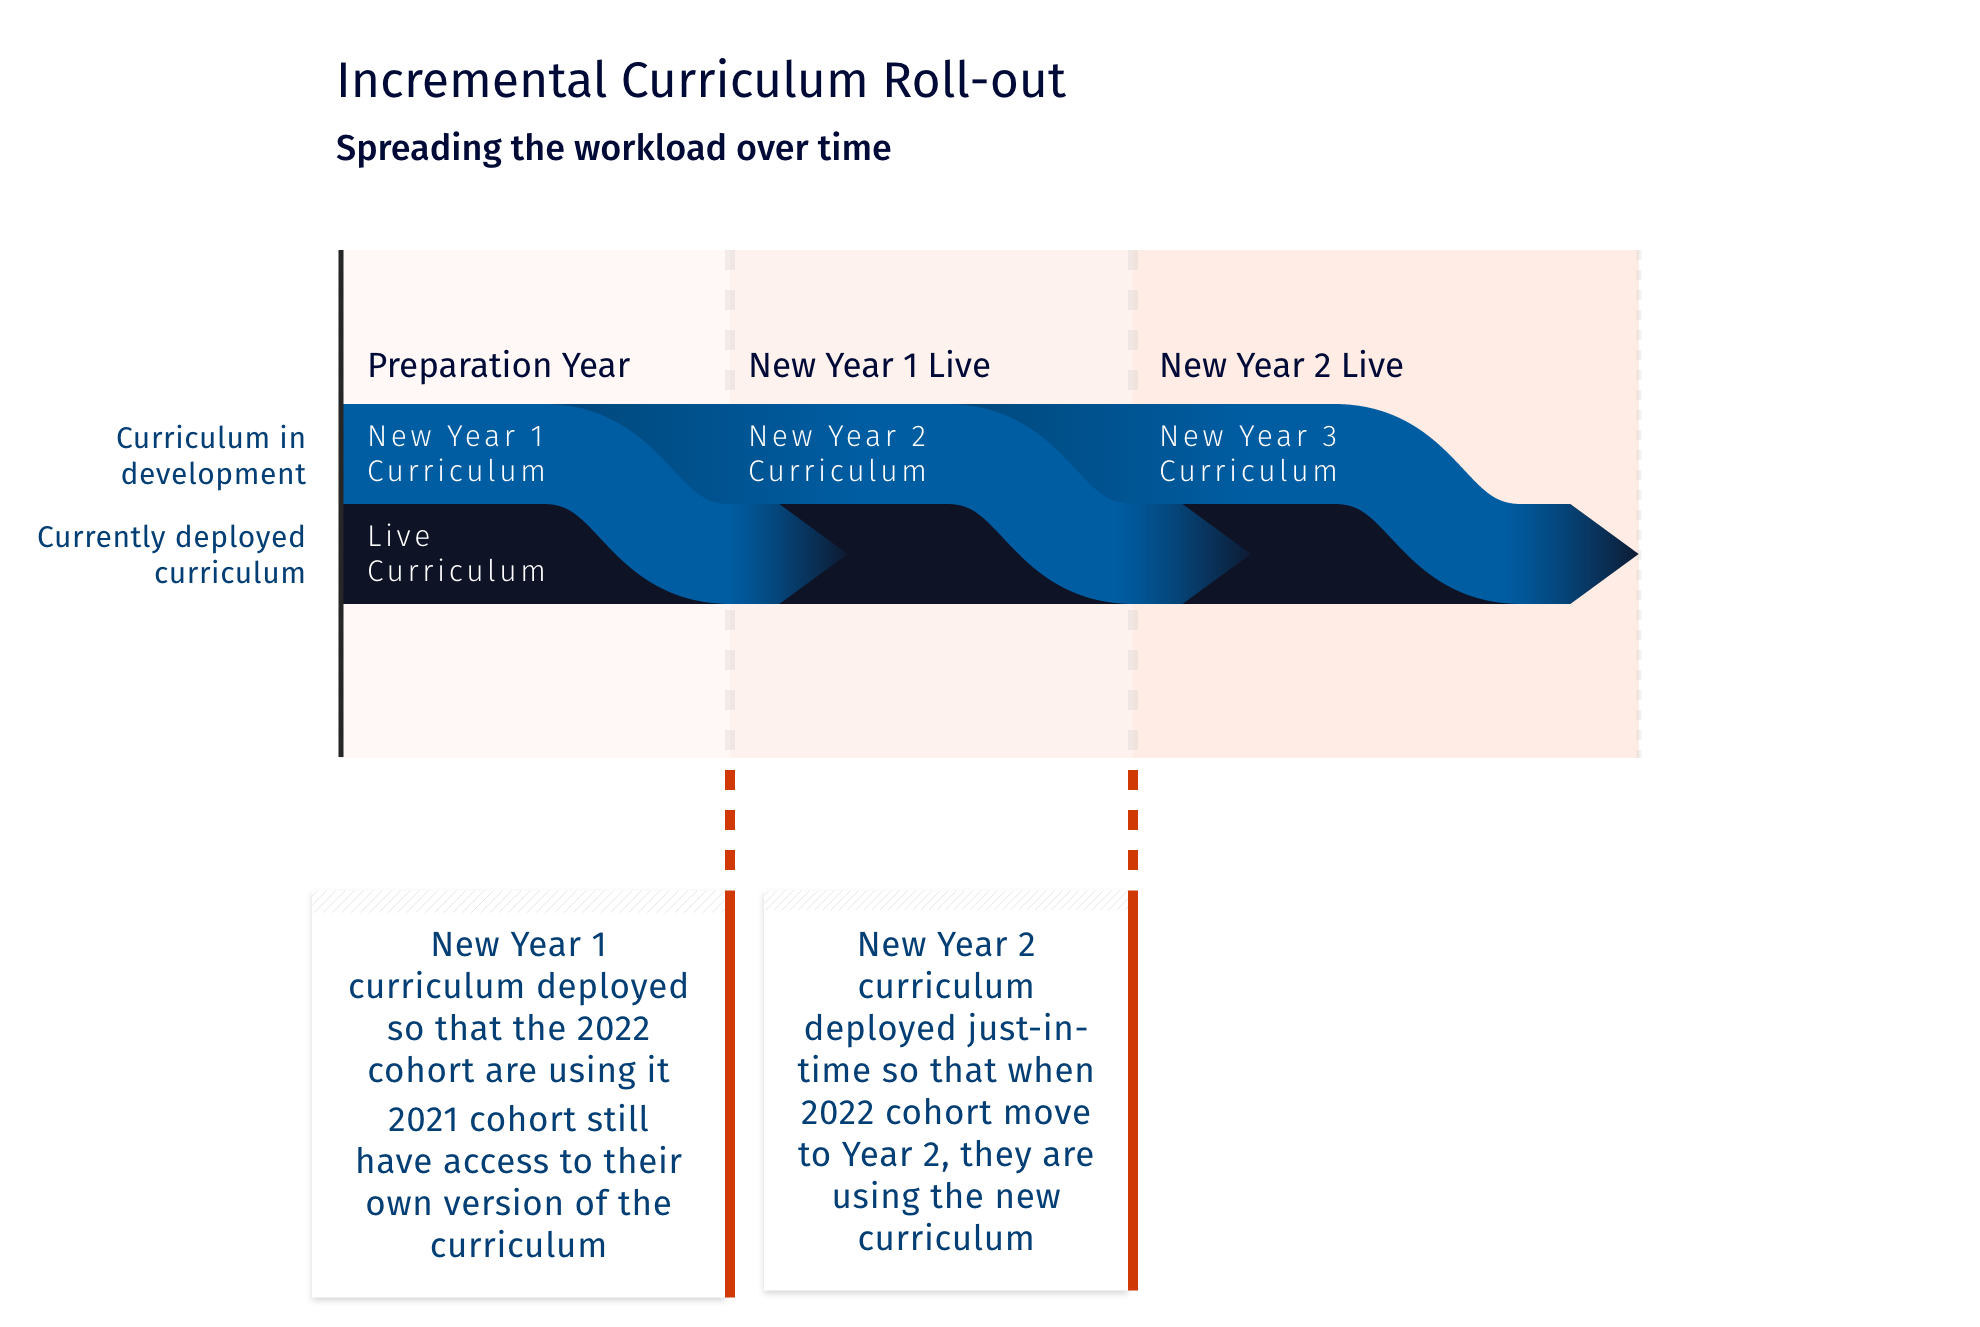 A diagram showing a flow of how the workload can be spread over time. Every year just before it is in use, a new year of curriculum is deployed so that a new cohort is up to date. One box after Year 1 says New Year 1 curriculum deployed so that the 2022 cohort are using it 2021 cohort still have access to their own version of the curriculum. The other box after Year 2 says New Year 2 curriculum deployed just-in-time so that when 2022 cohort move to Year 2, they are using the new curriculum